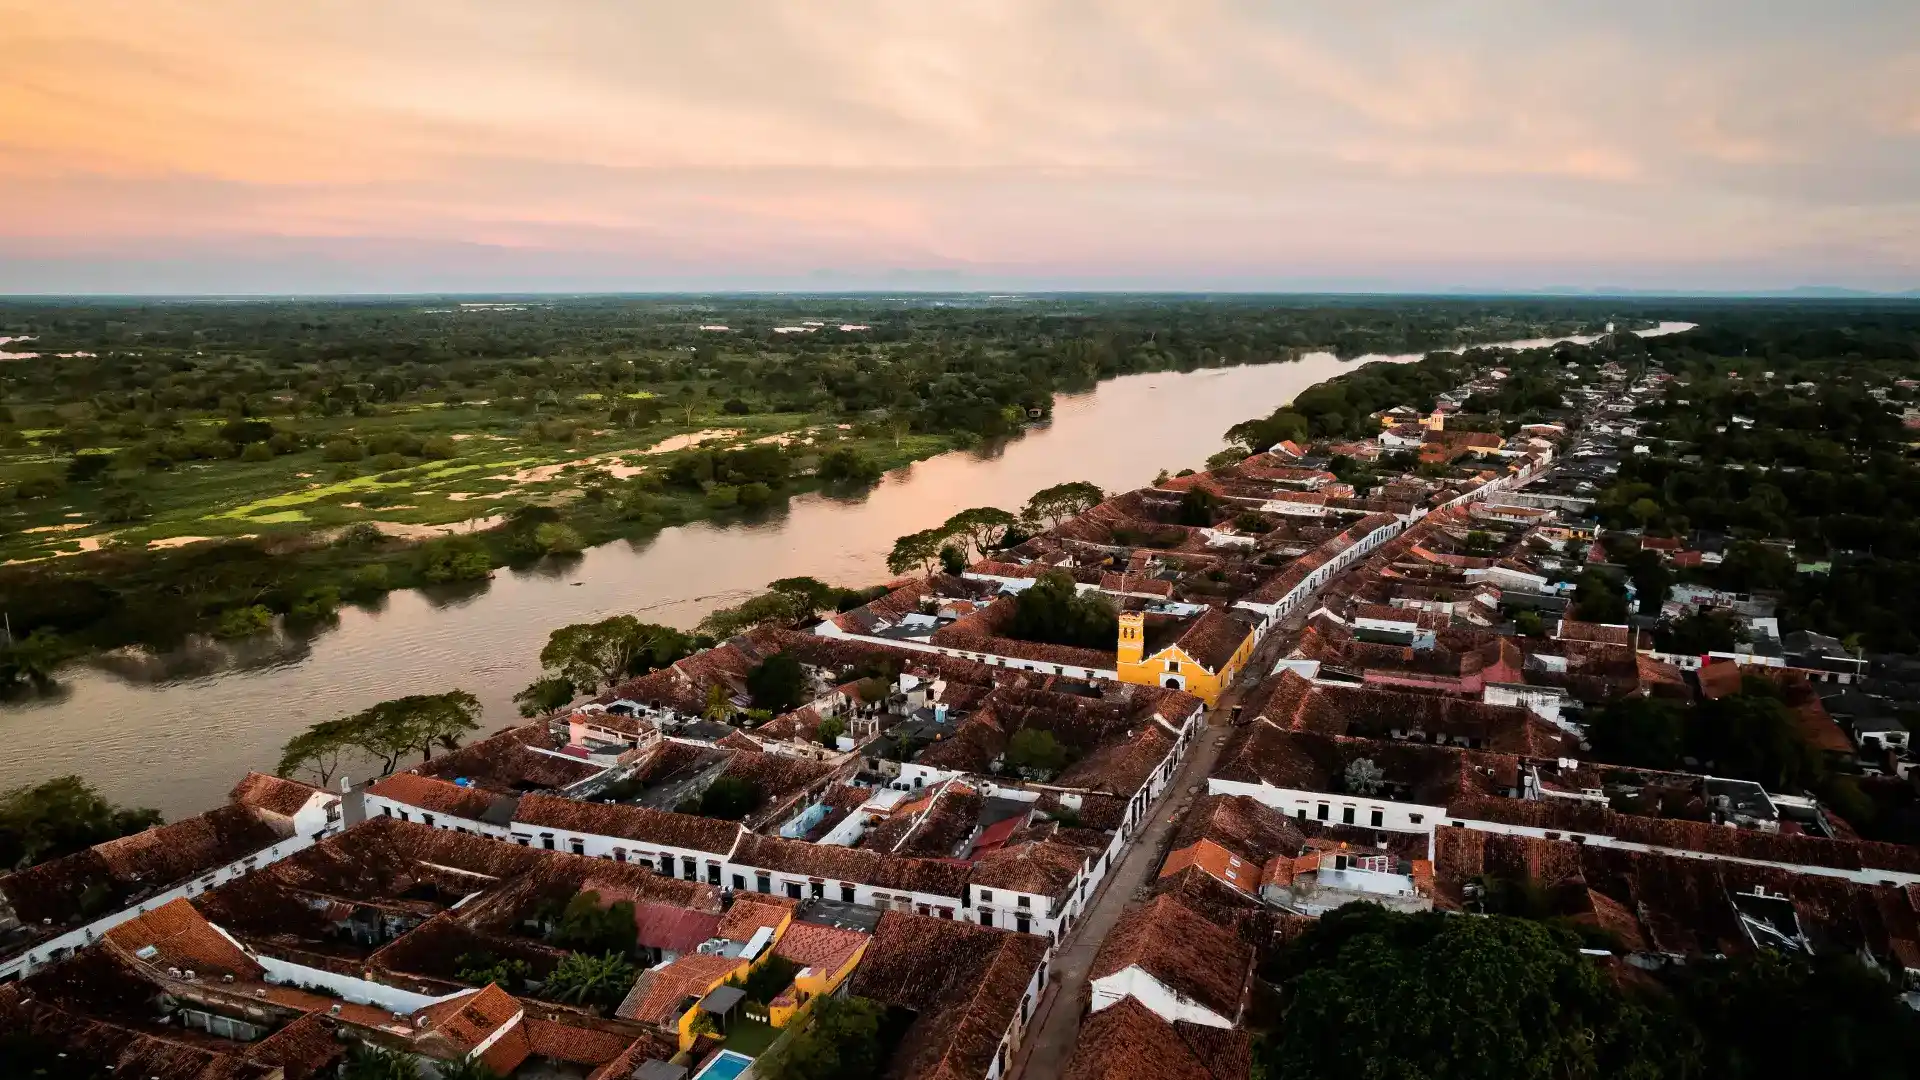 Magdalena river in Colombia